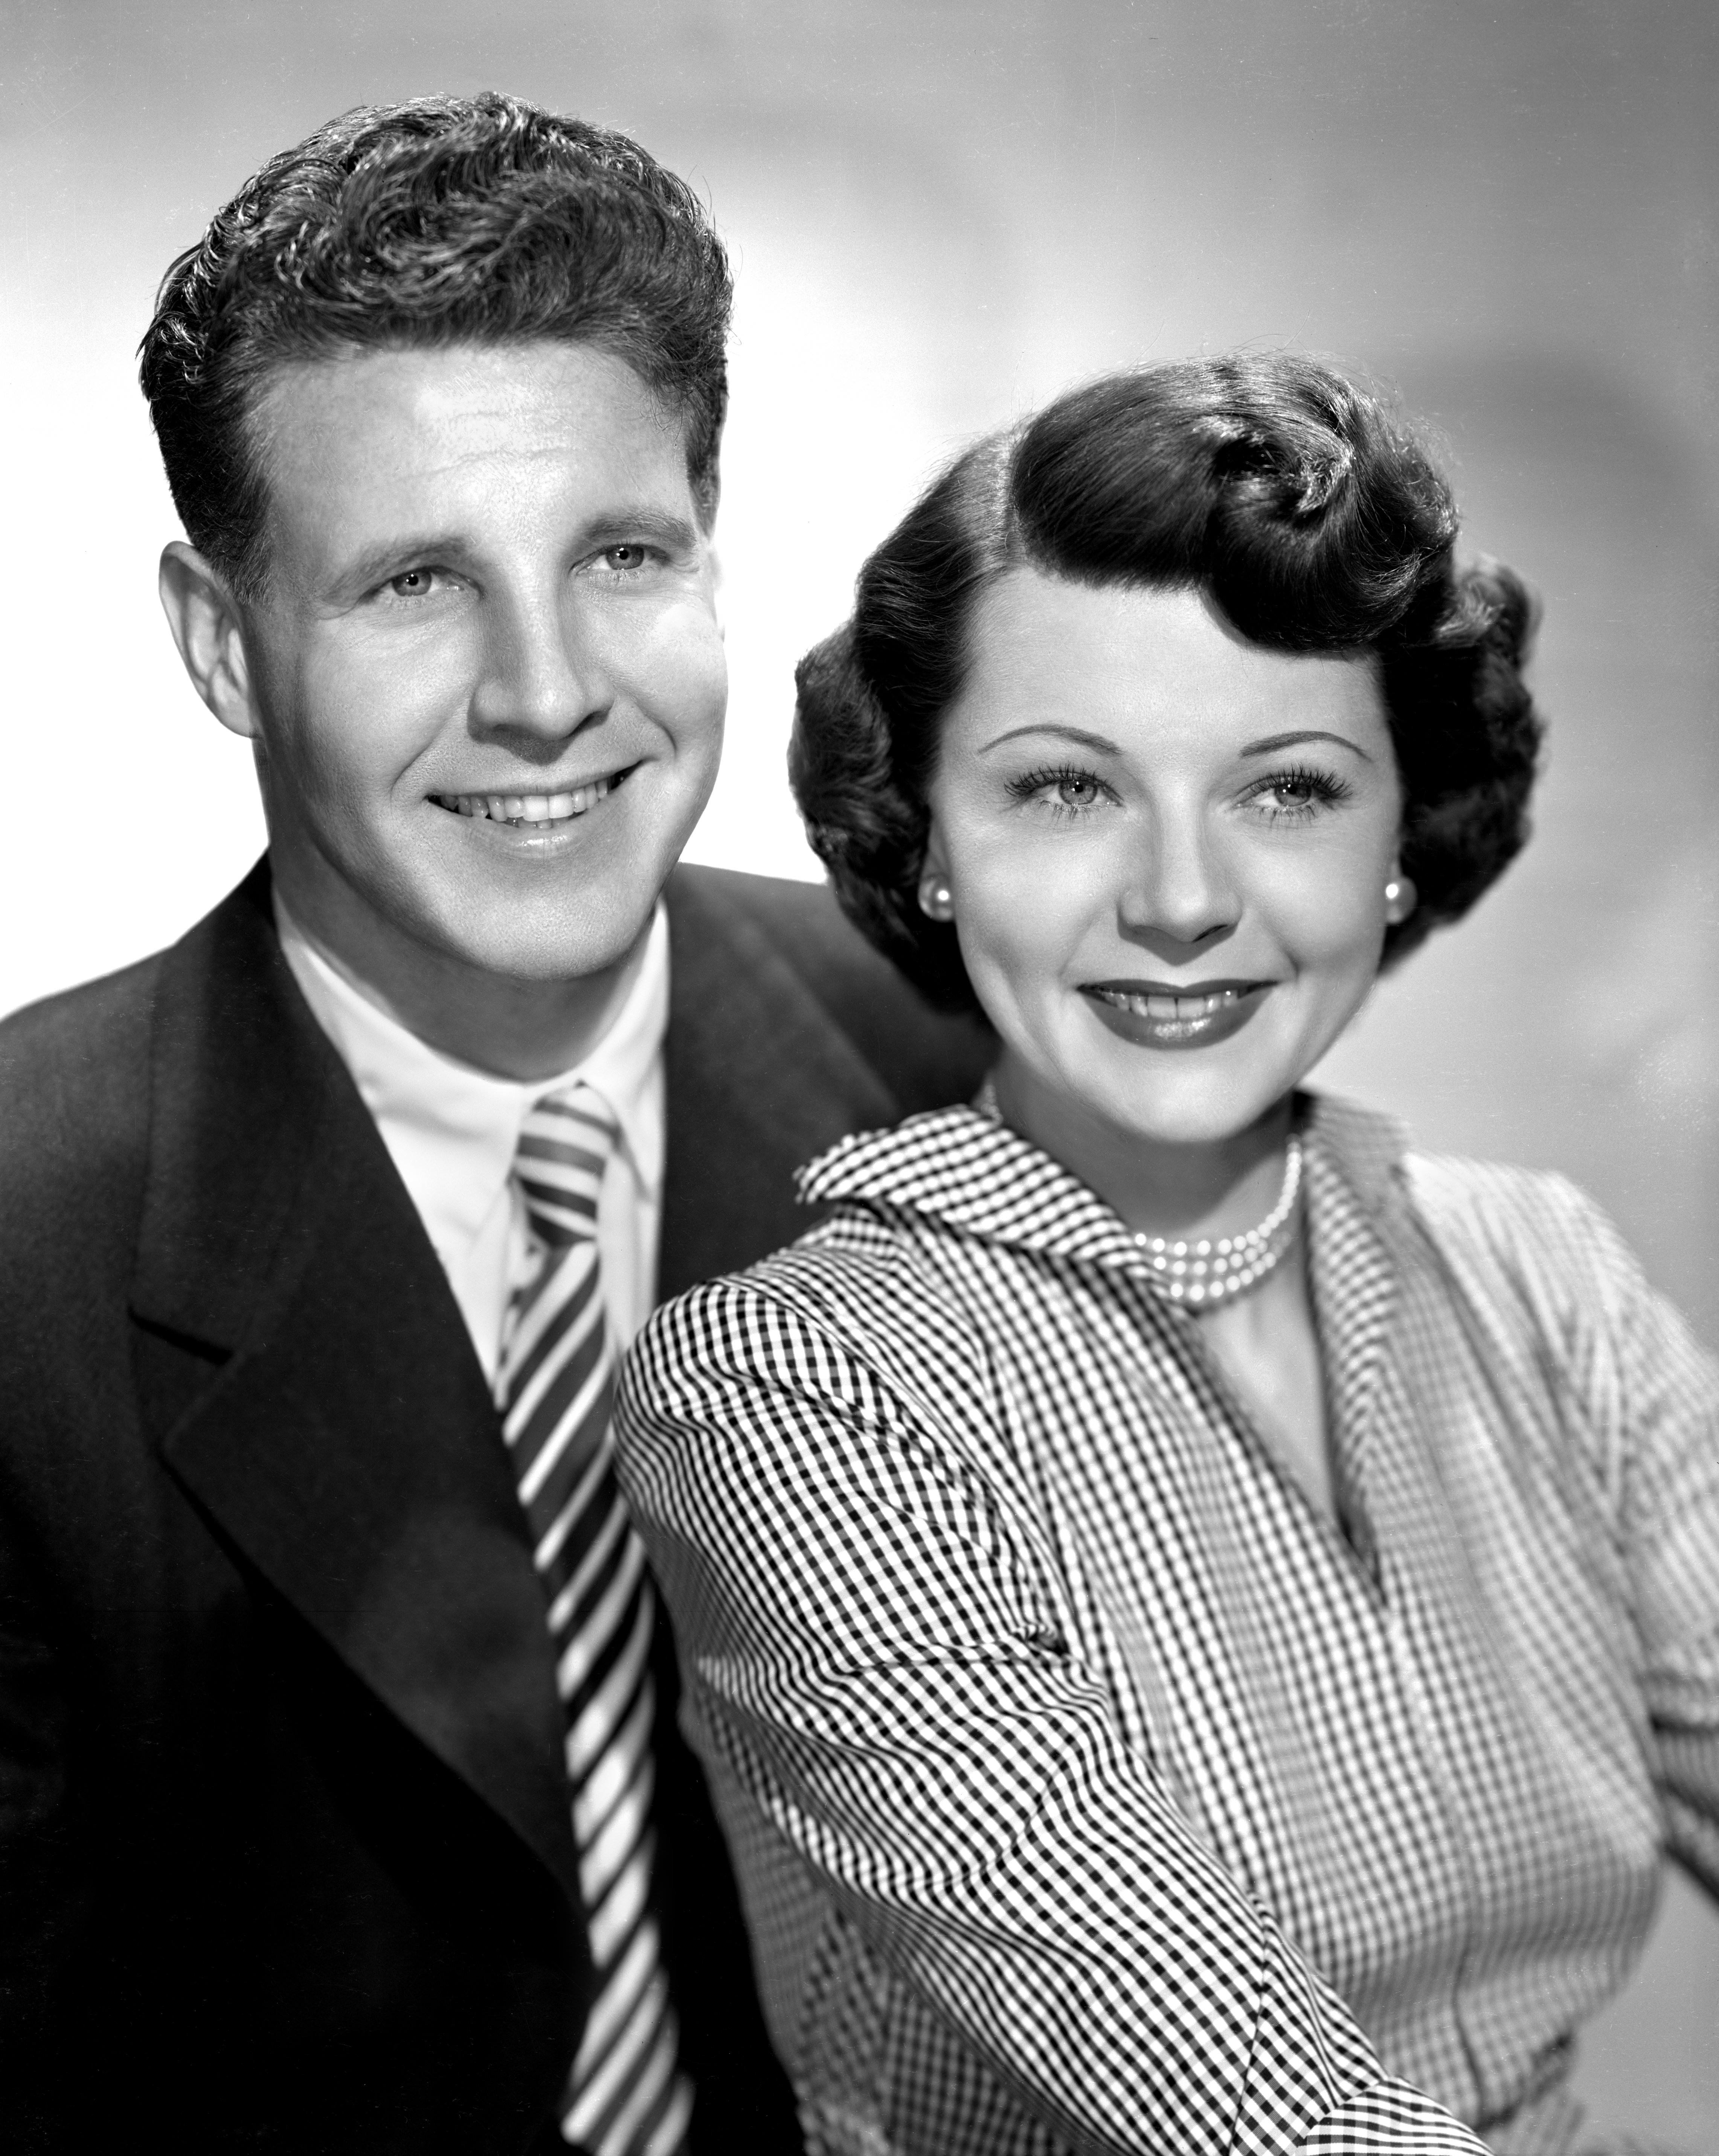 Ozzie and Harriet Nelson in a portrait for "The Adventures of Ozzie and Harriet" in Hollywood, California, on March 1, 1949. | Source: CBS/Getty Images